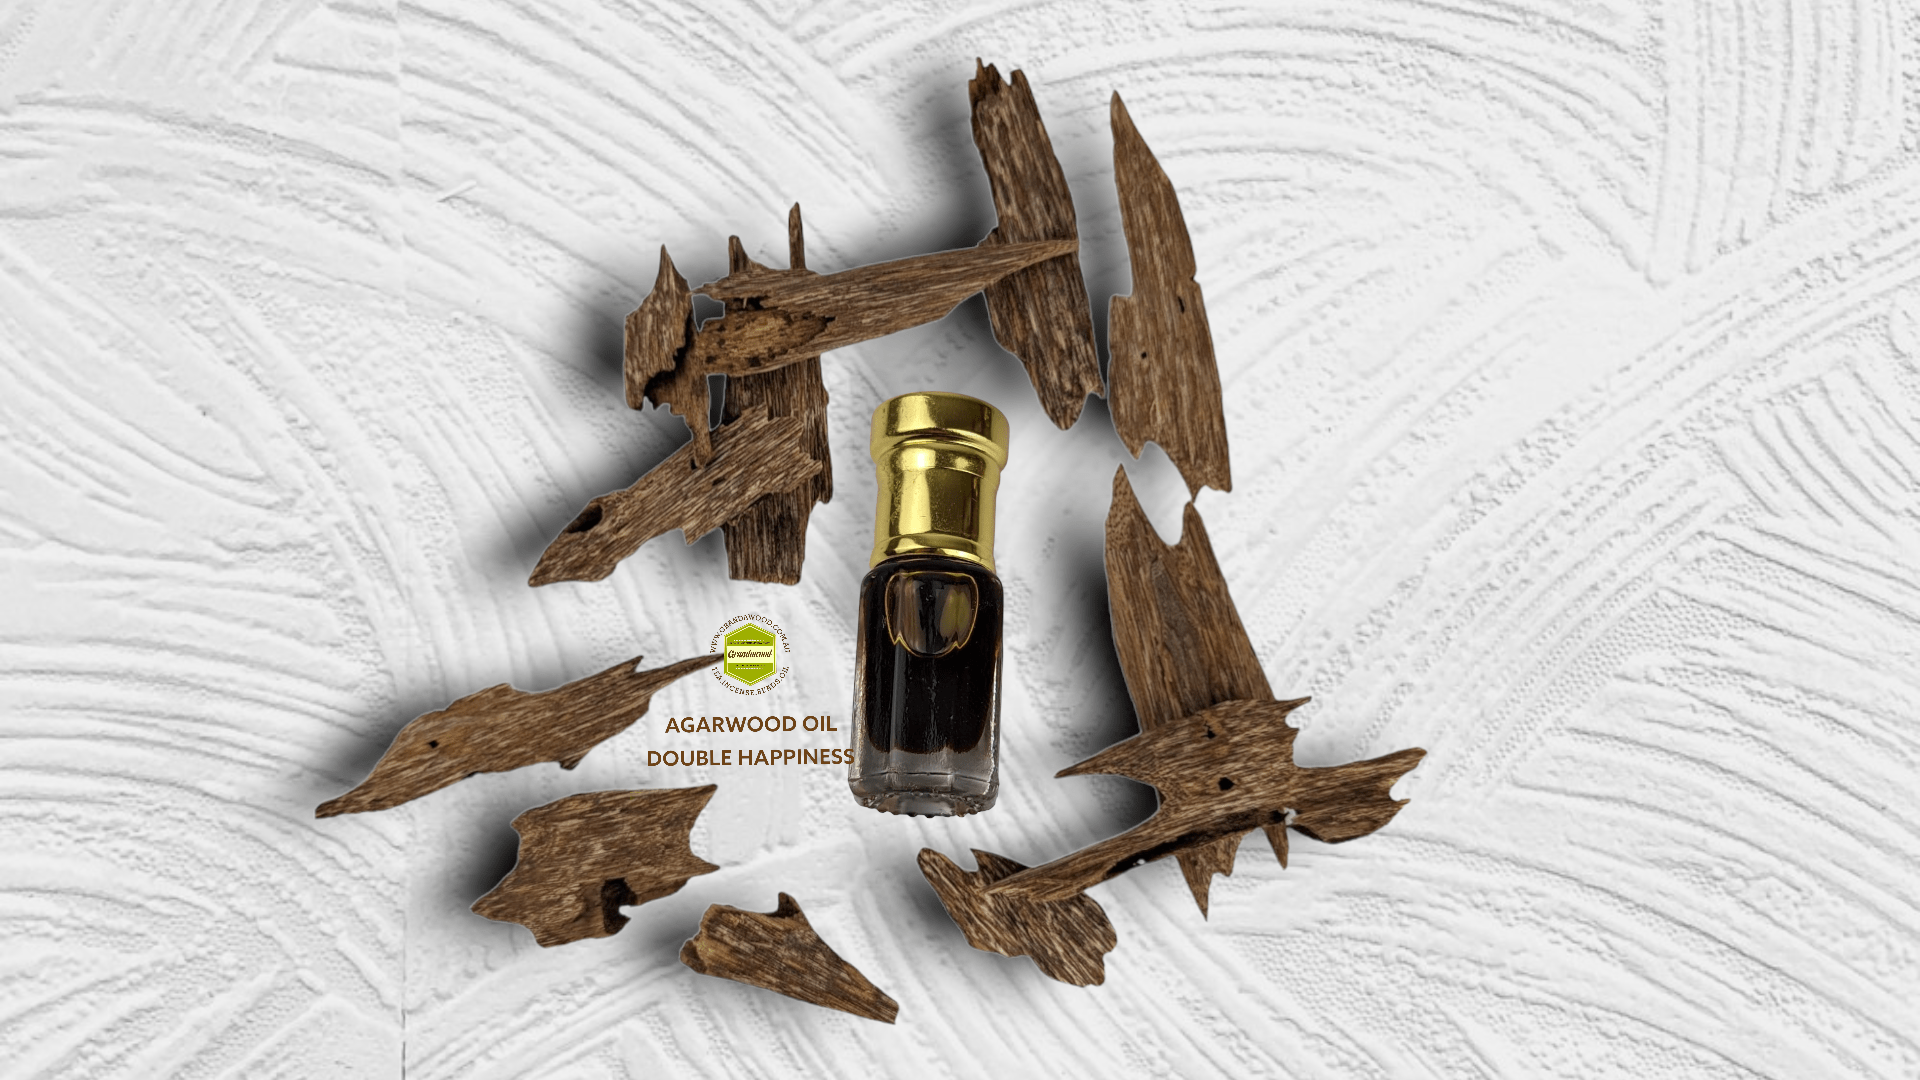 *New* The Heaven Smoke- 100% Pure Cutlivated Agarwood Oil (Oud)- Co2 Supercritical Fluid Extraction - Double Happiness- Cultivated Agarwood / 3g